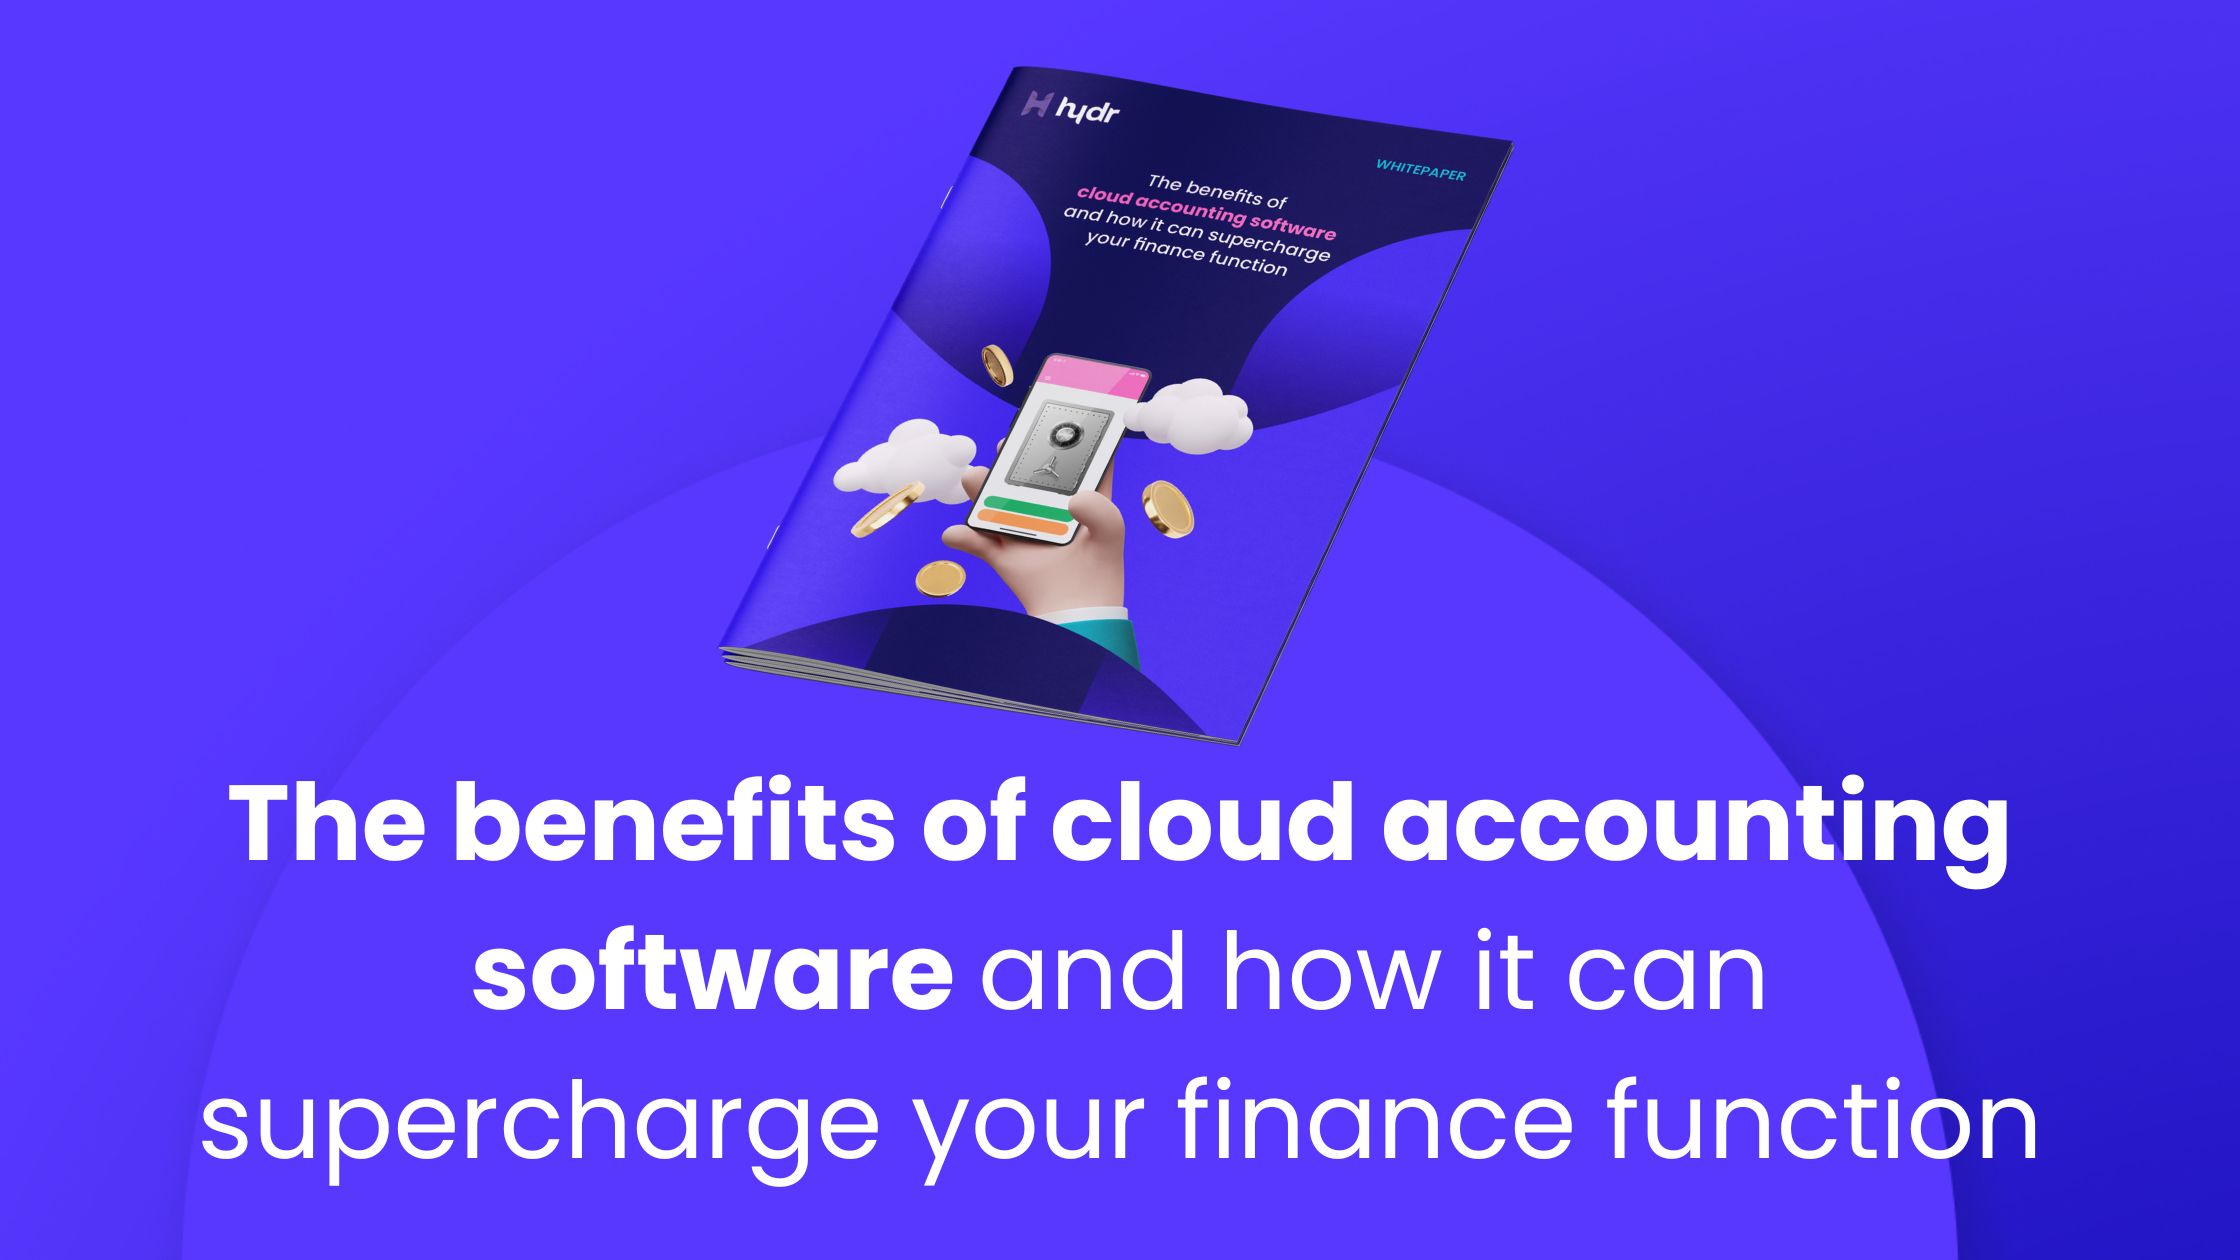 Optimise your finance function with cloud accounting